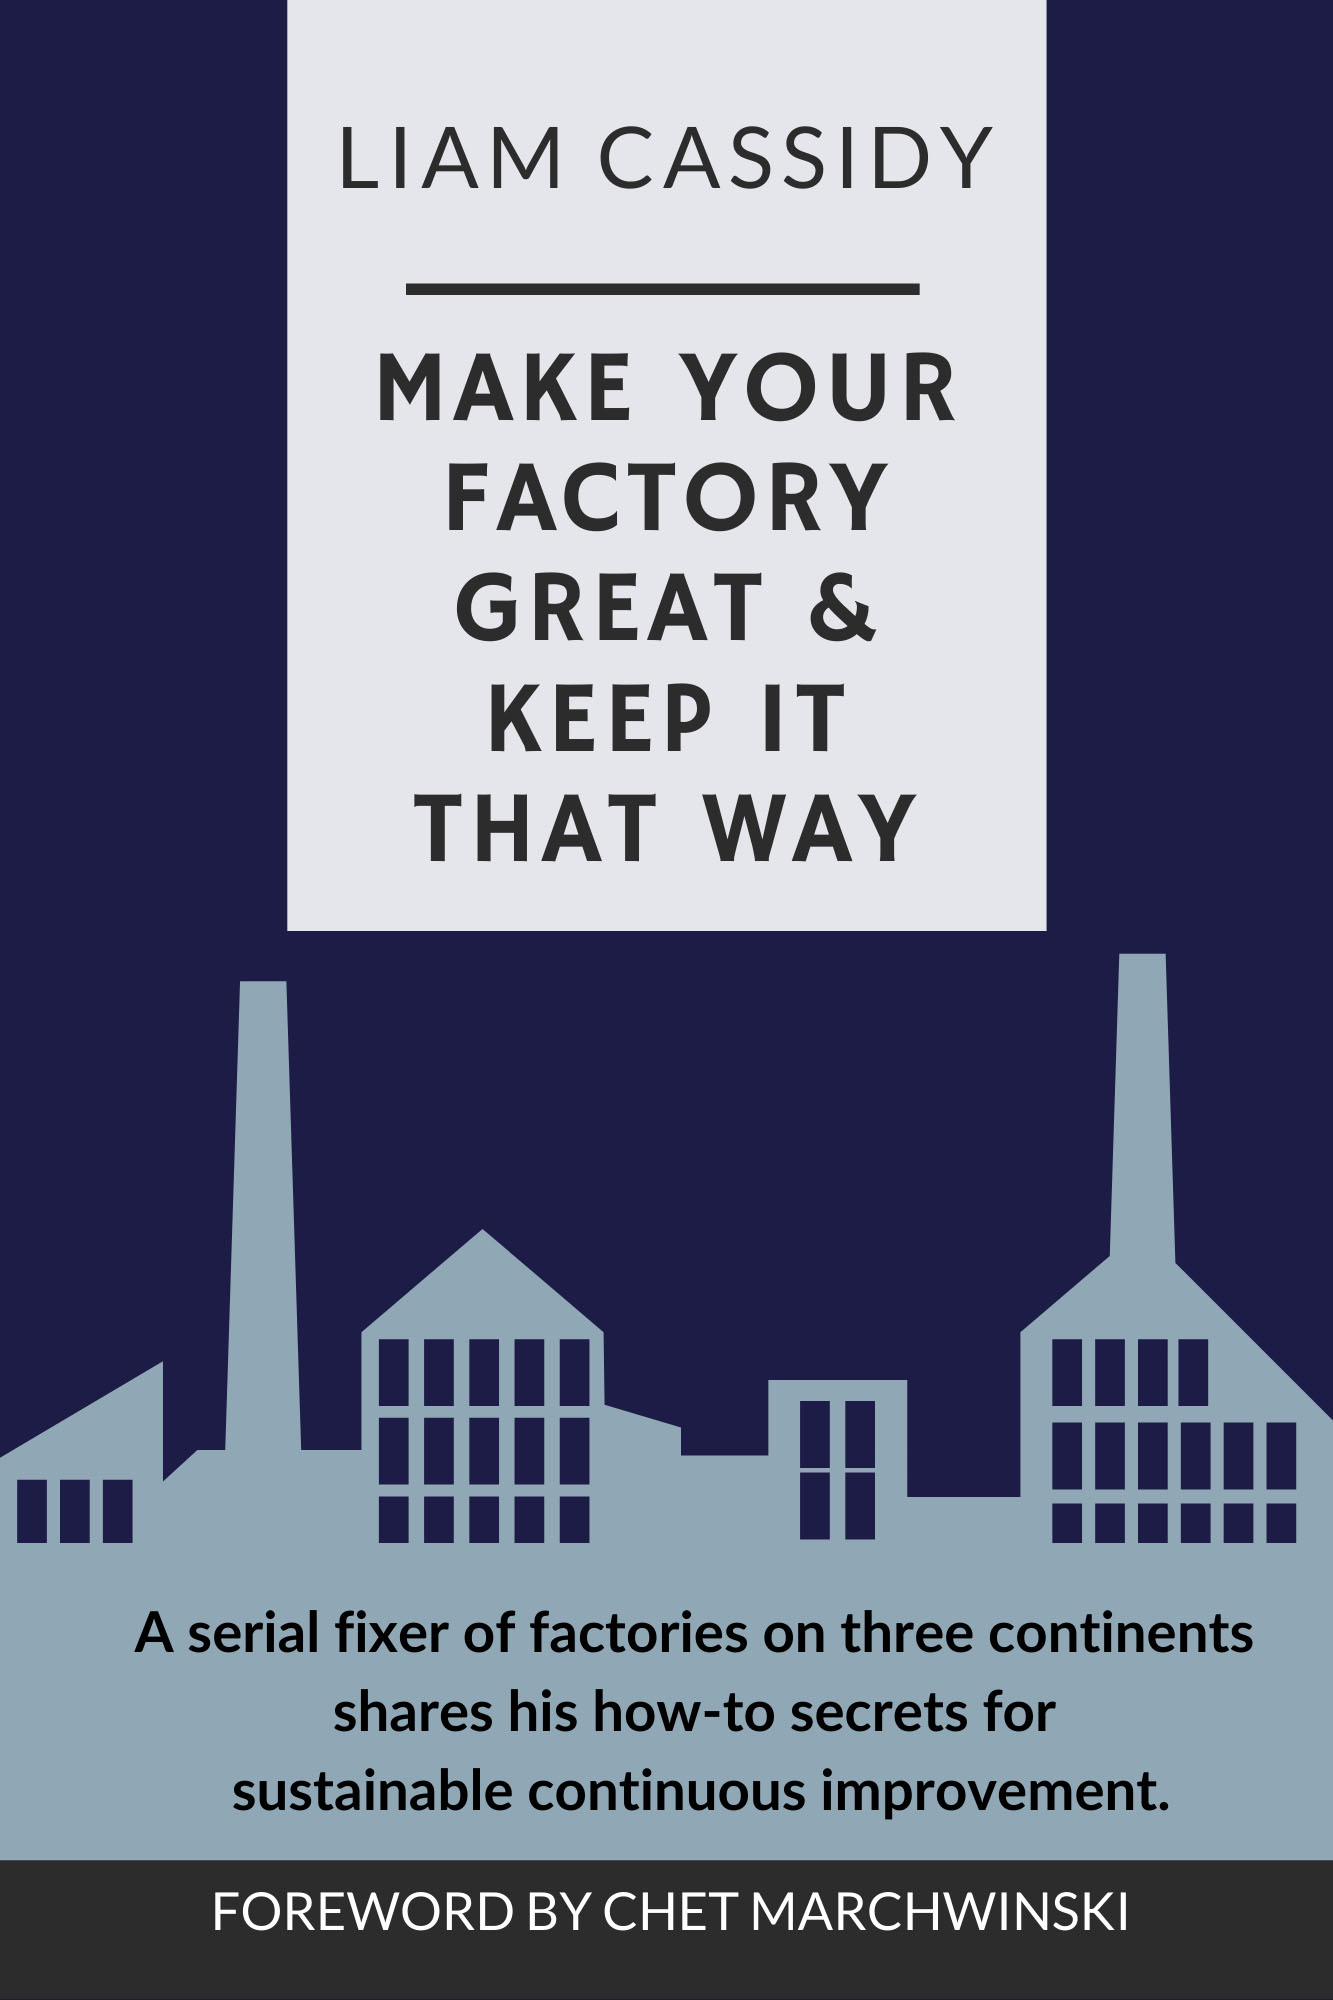 Make Your Factory Great & Keep It That Way by Liam Cassidy